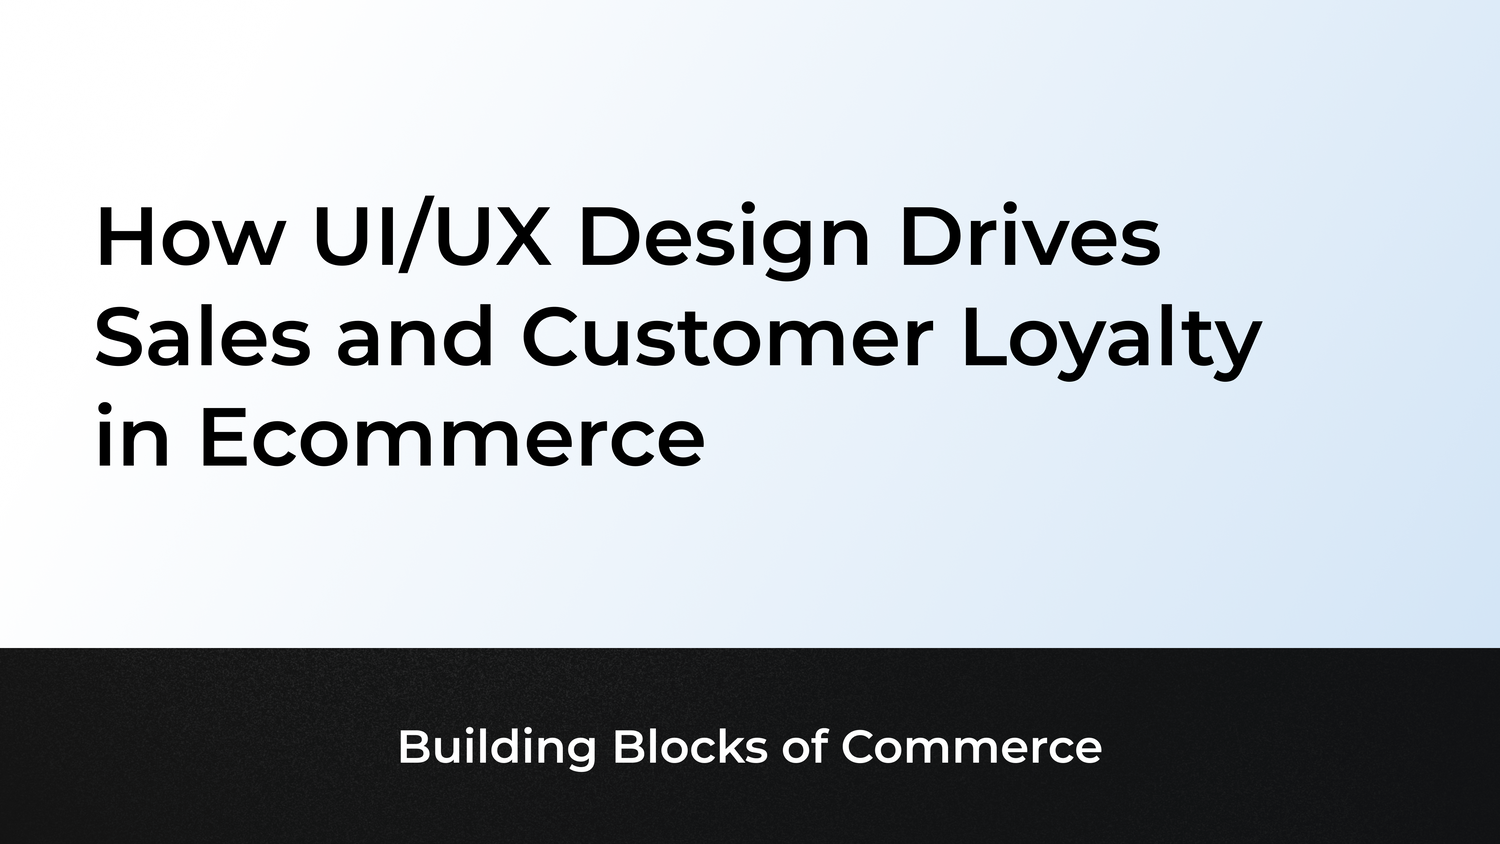 How UI/UX Design Drives Sales and Customer Loyalty in Ecommerce